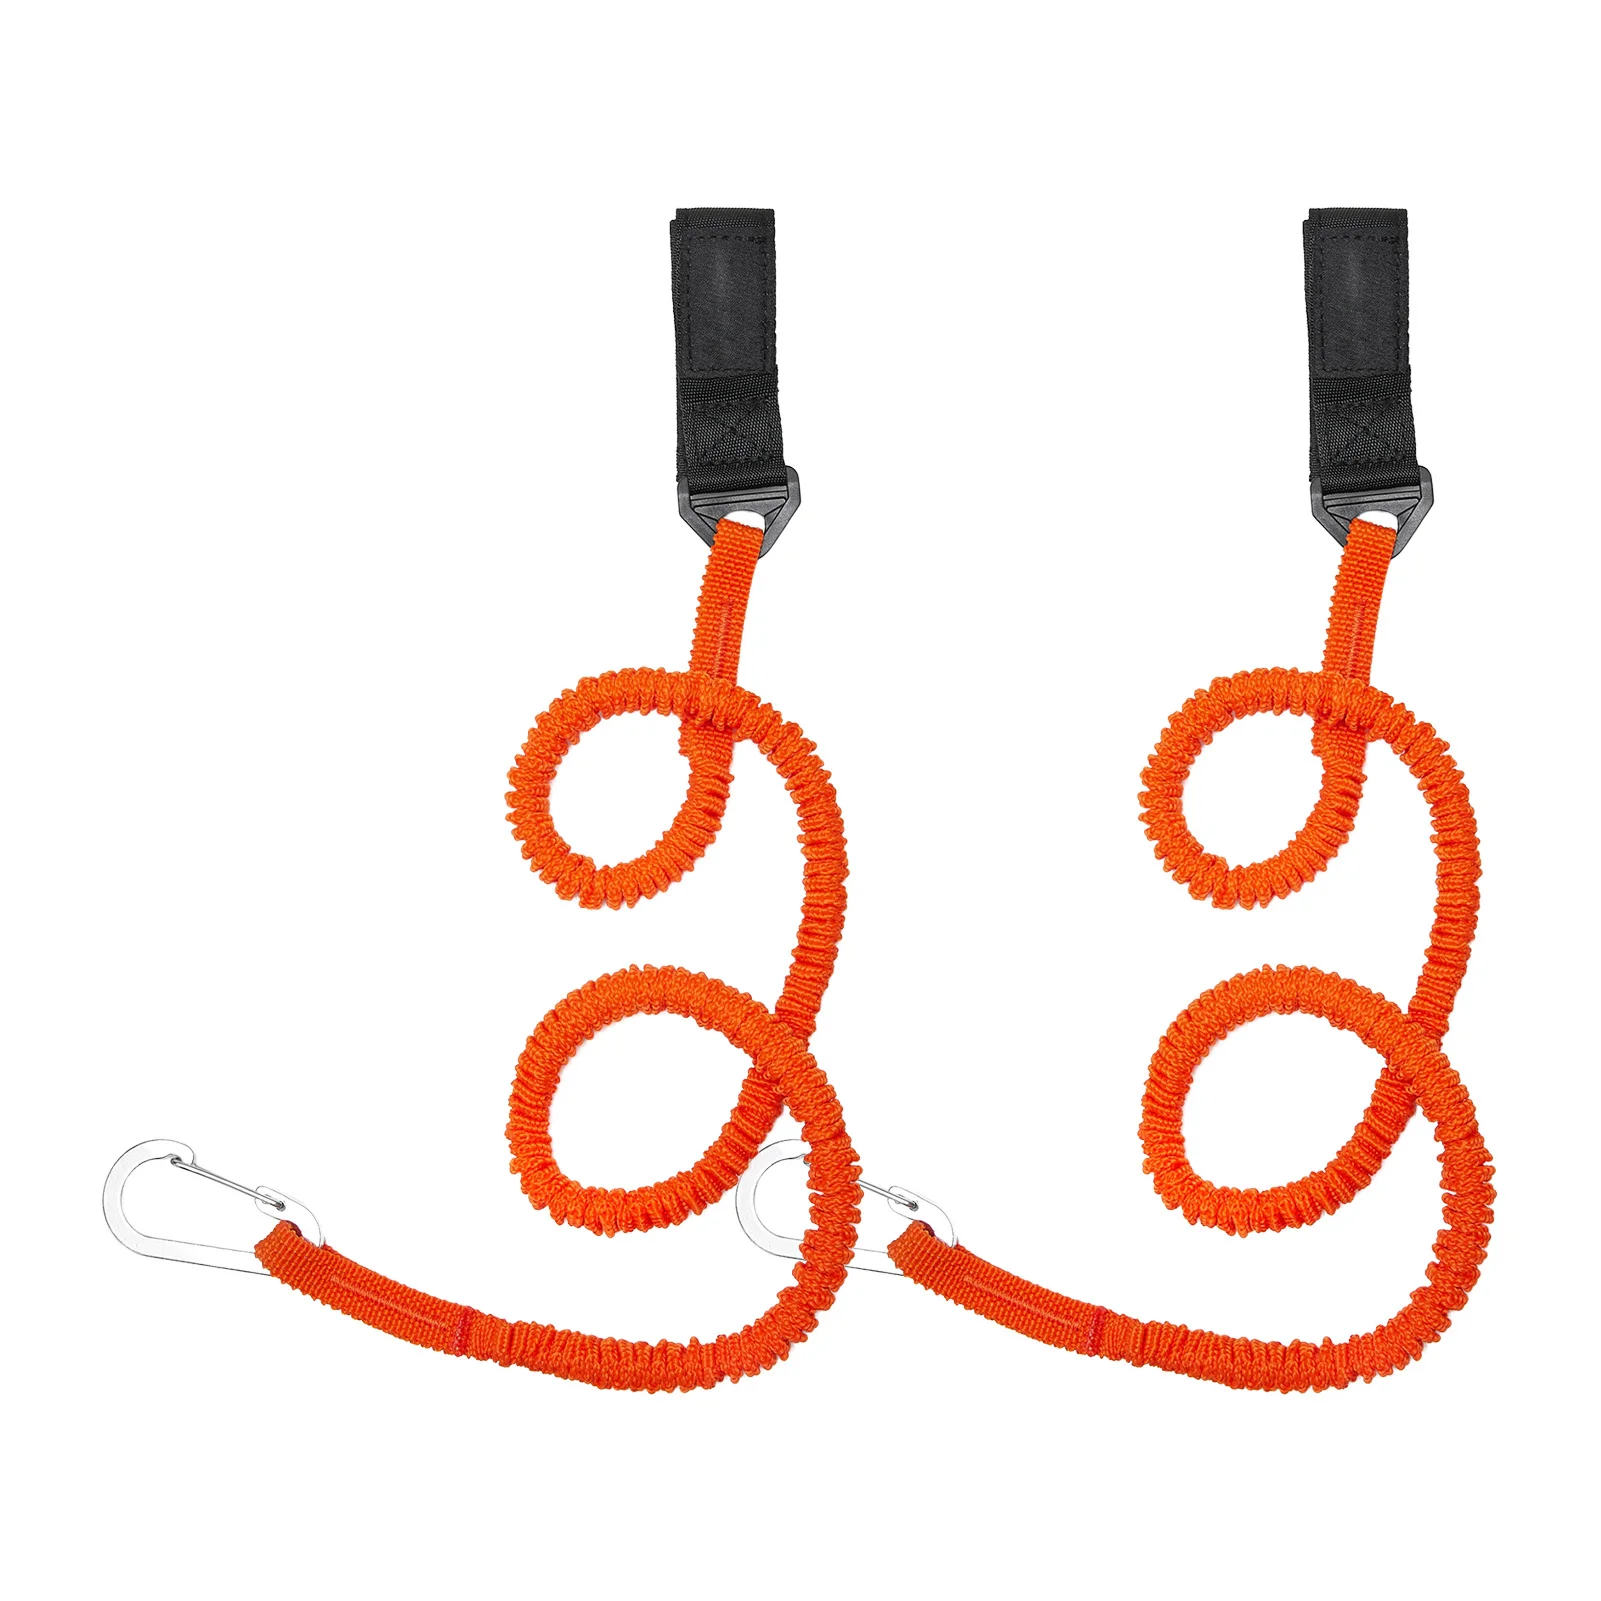 

2PCS Elastic Kayak Paddle Leash Adjustable With Safety Hook Fishing Rod Pole Coiled Lanyard Cord Tie Rope Rowing Boat Accessorie